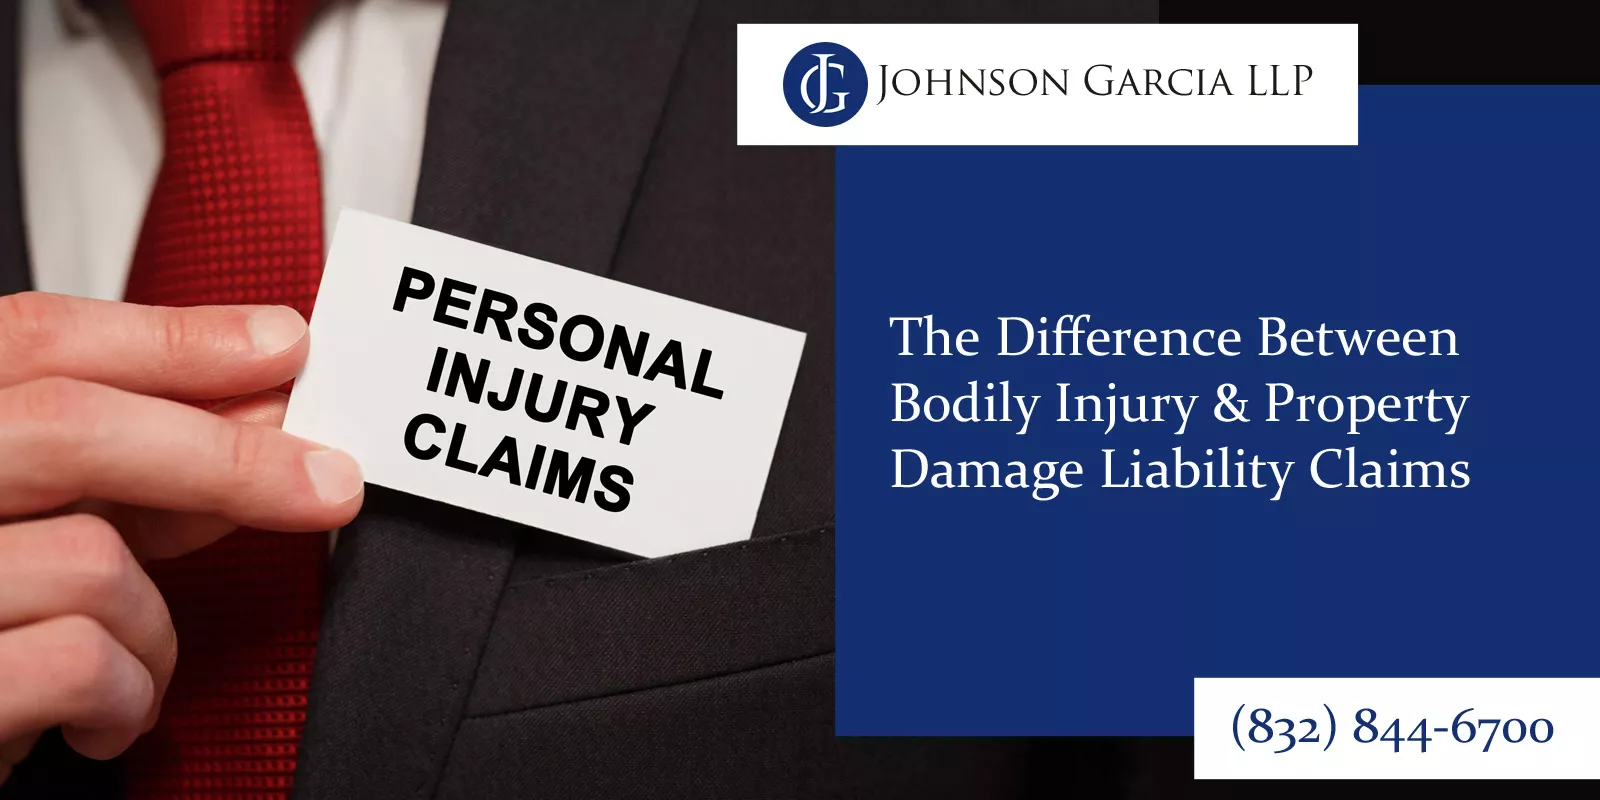 Houston personal injury lawyer who files bodily injury claims